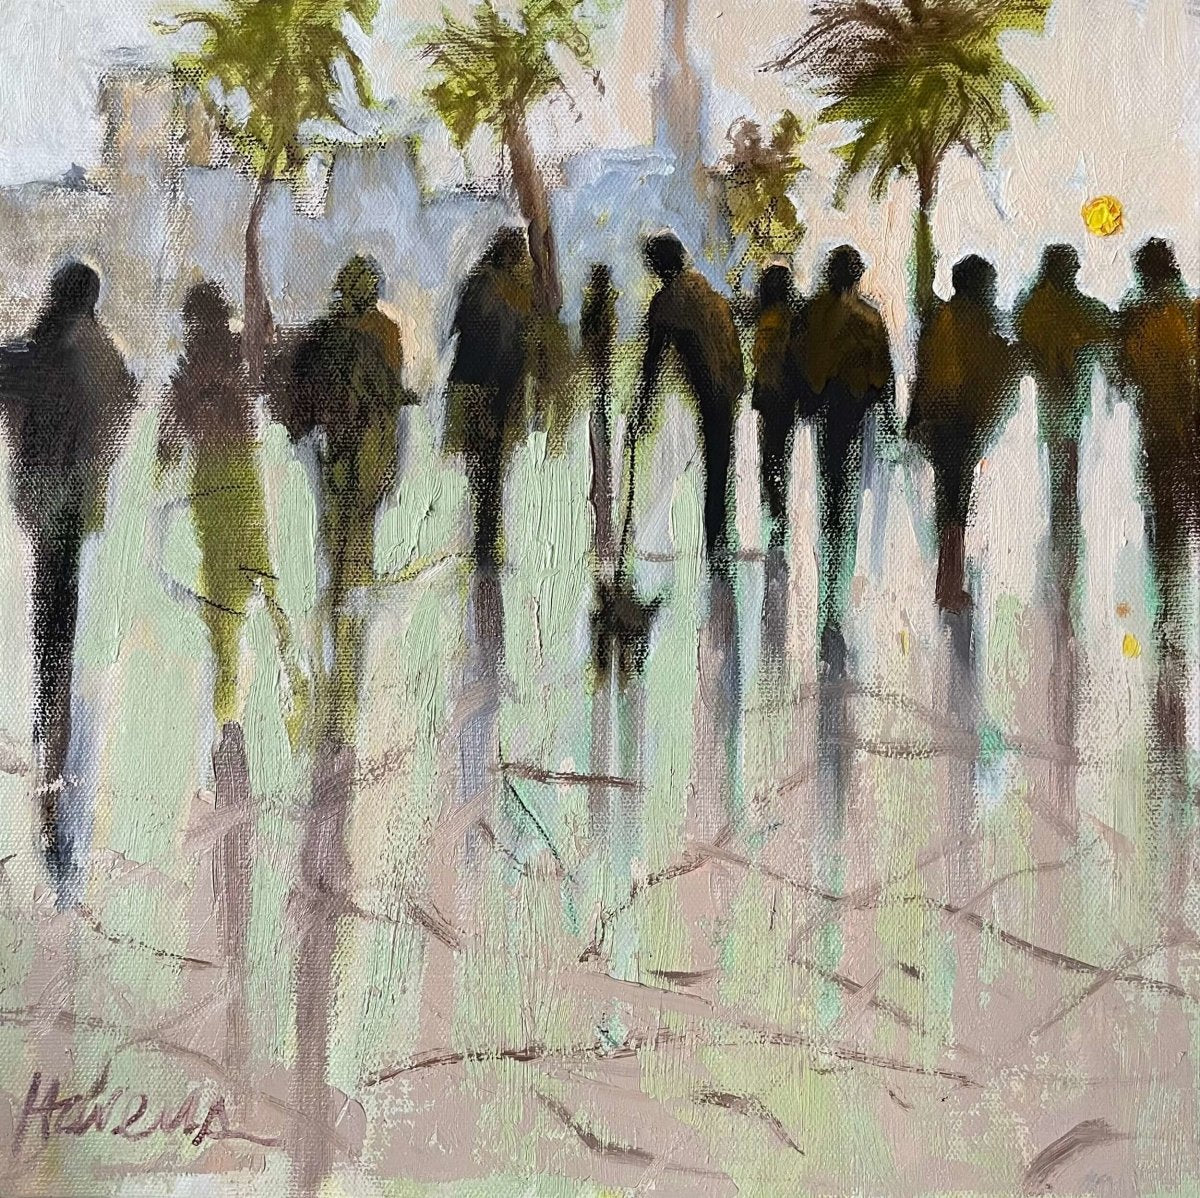 Clap When the Sun Sets by Betsy Havens at LePrince Galleries